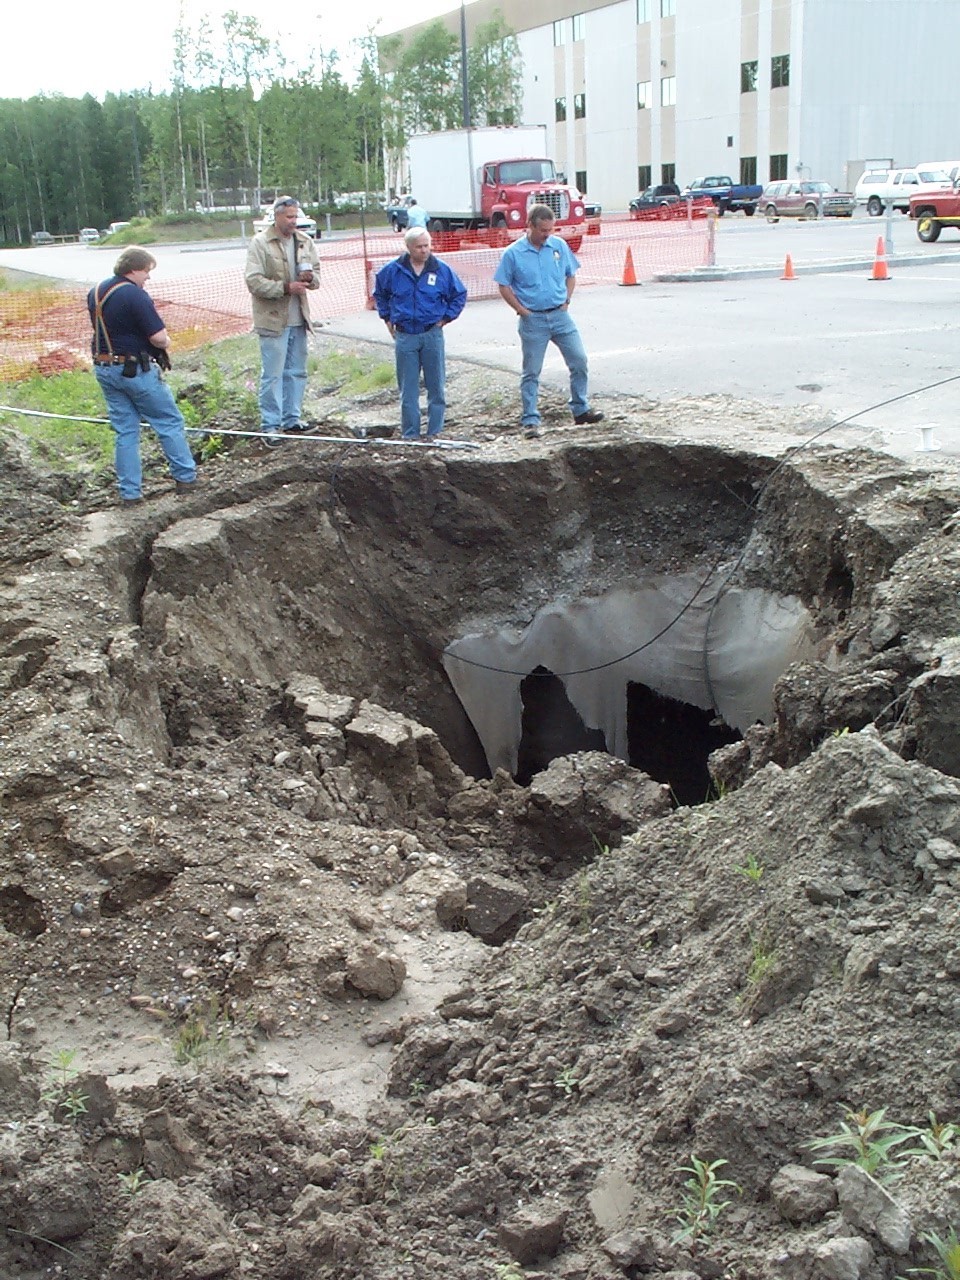 Several men stand around a large sinkhole, with a parking lot and a university building in the background.